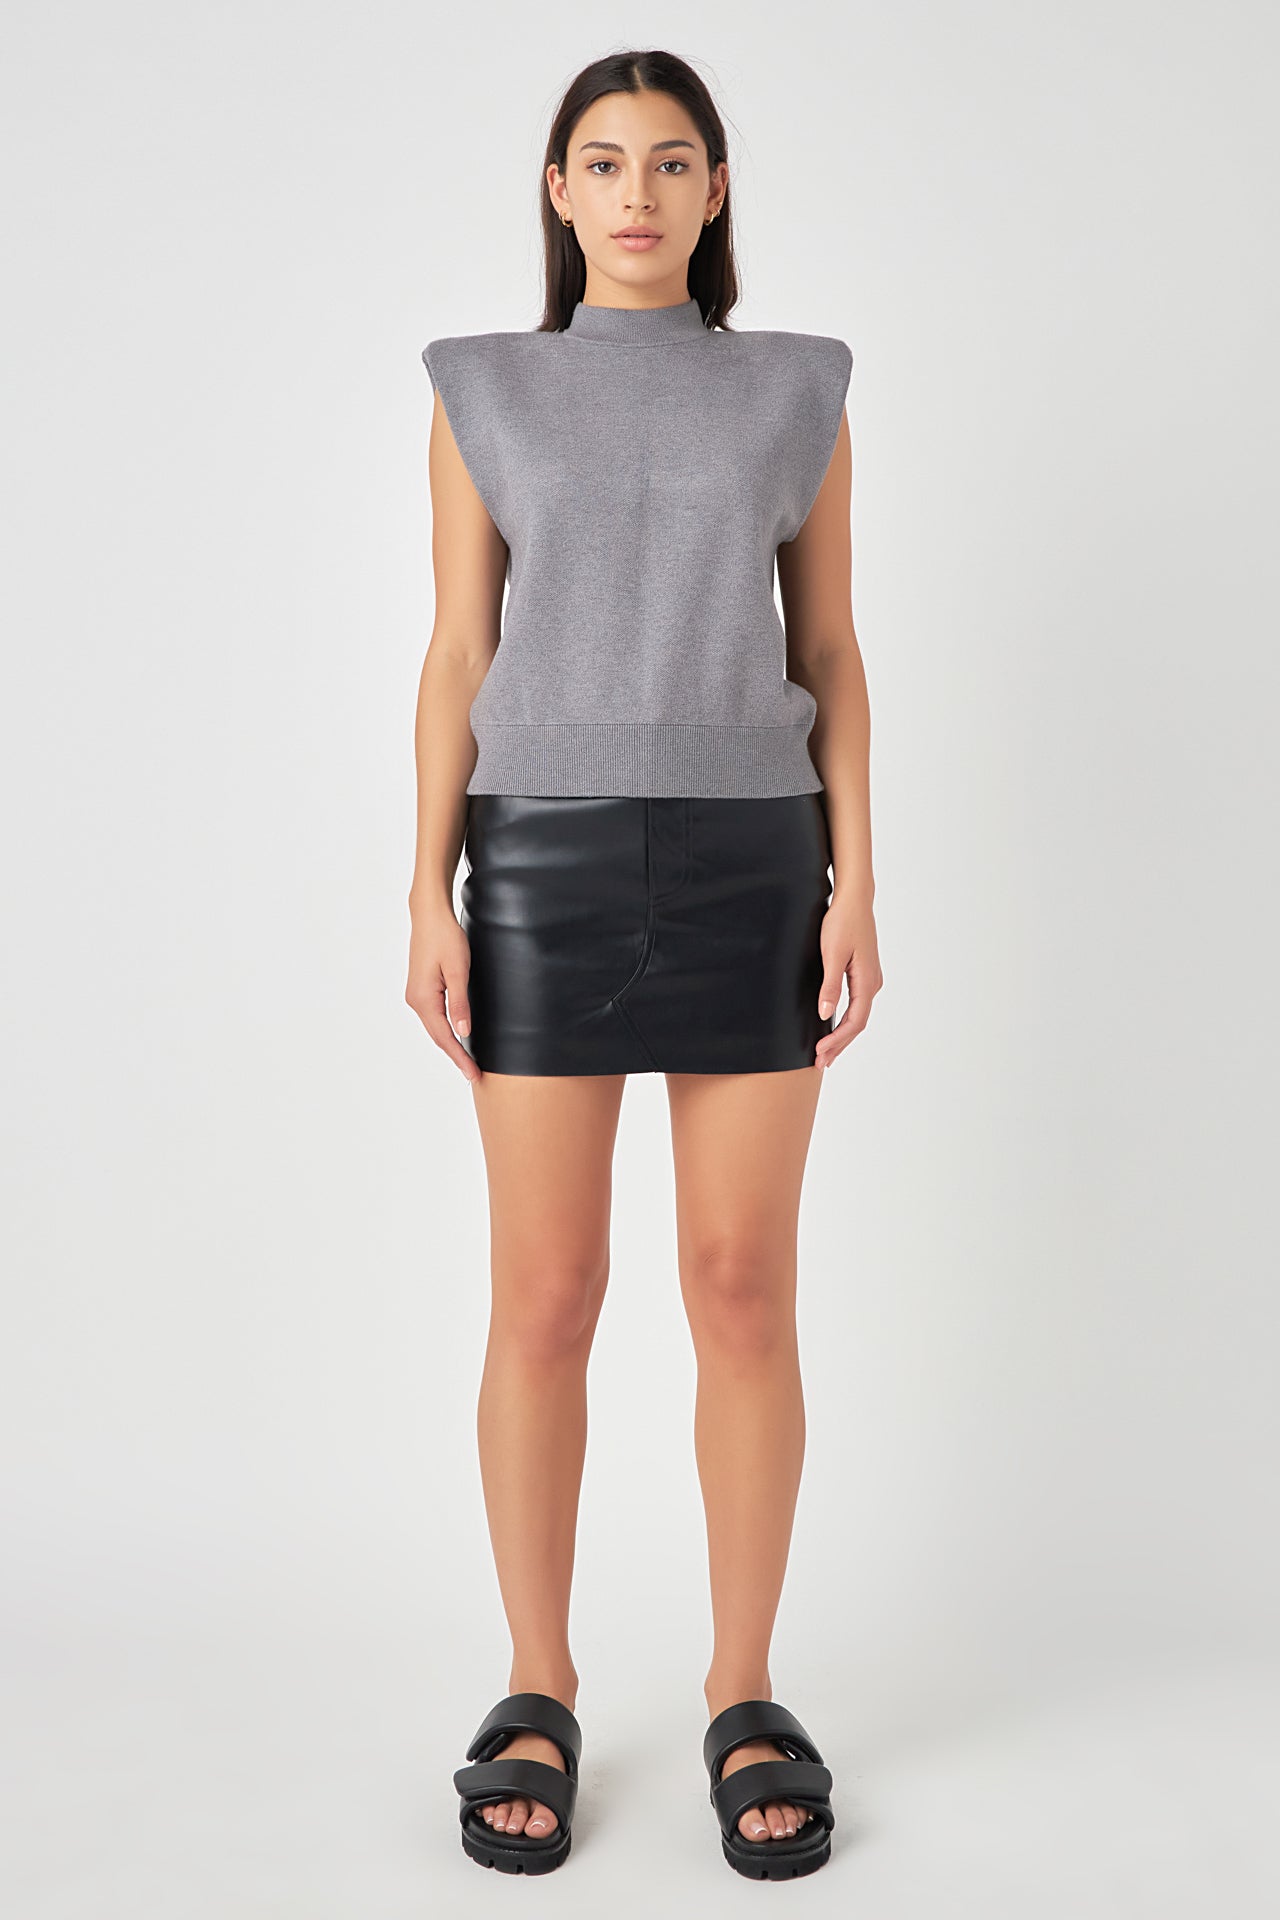 GREY LAB-Mock Neck Sleeveless Knit Top-SWEATERS & KNITS available at Objectrare